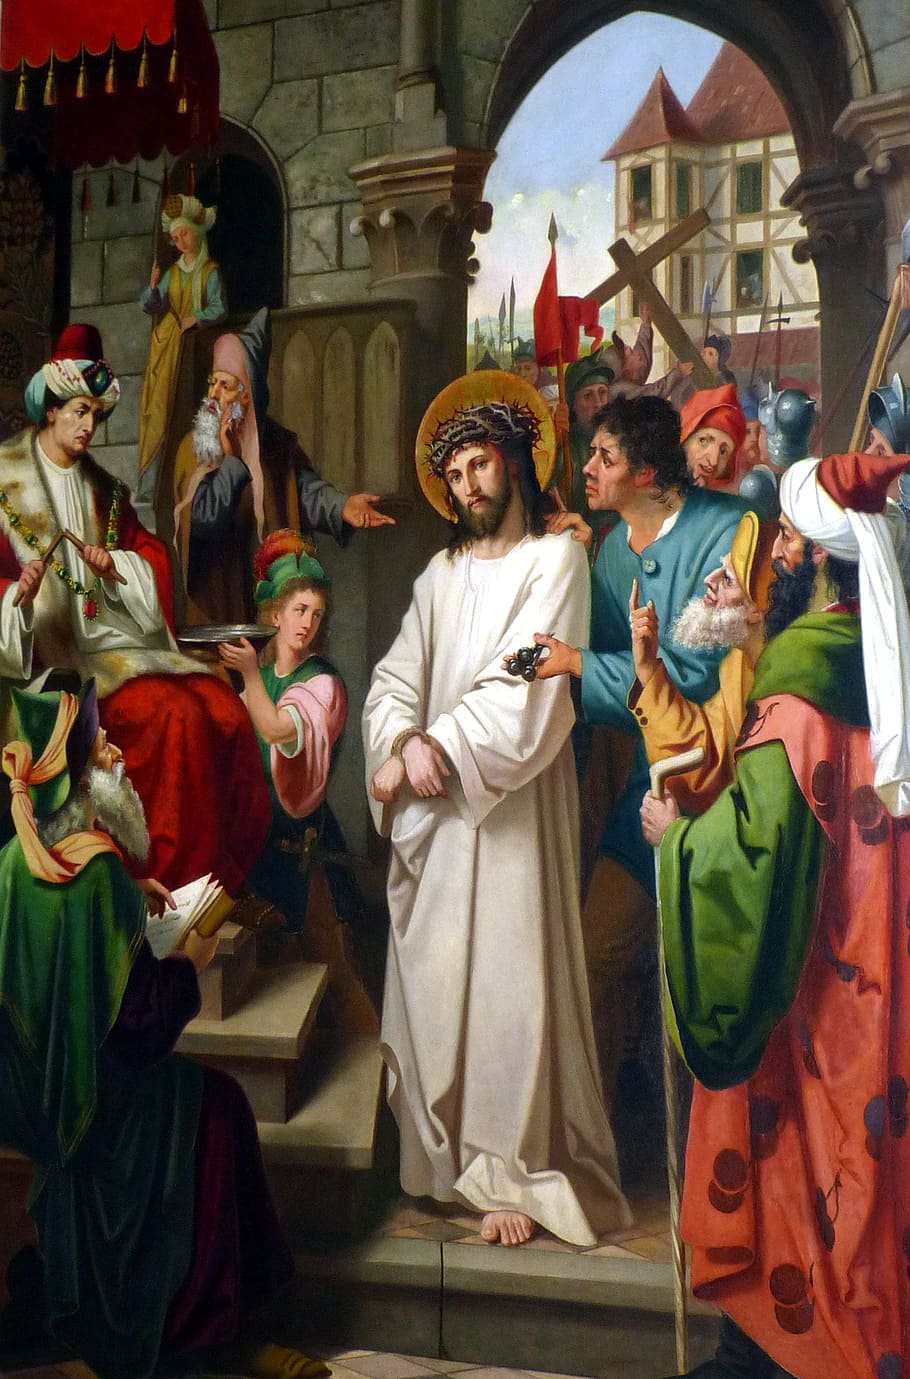 Jesus Christ Painting, Way Of The Cross, Passion, Mourning, - Way Of The Cross 4k - HD Wallpaper 